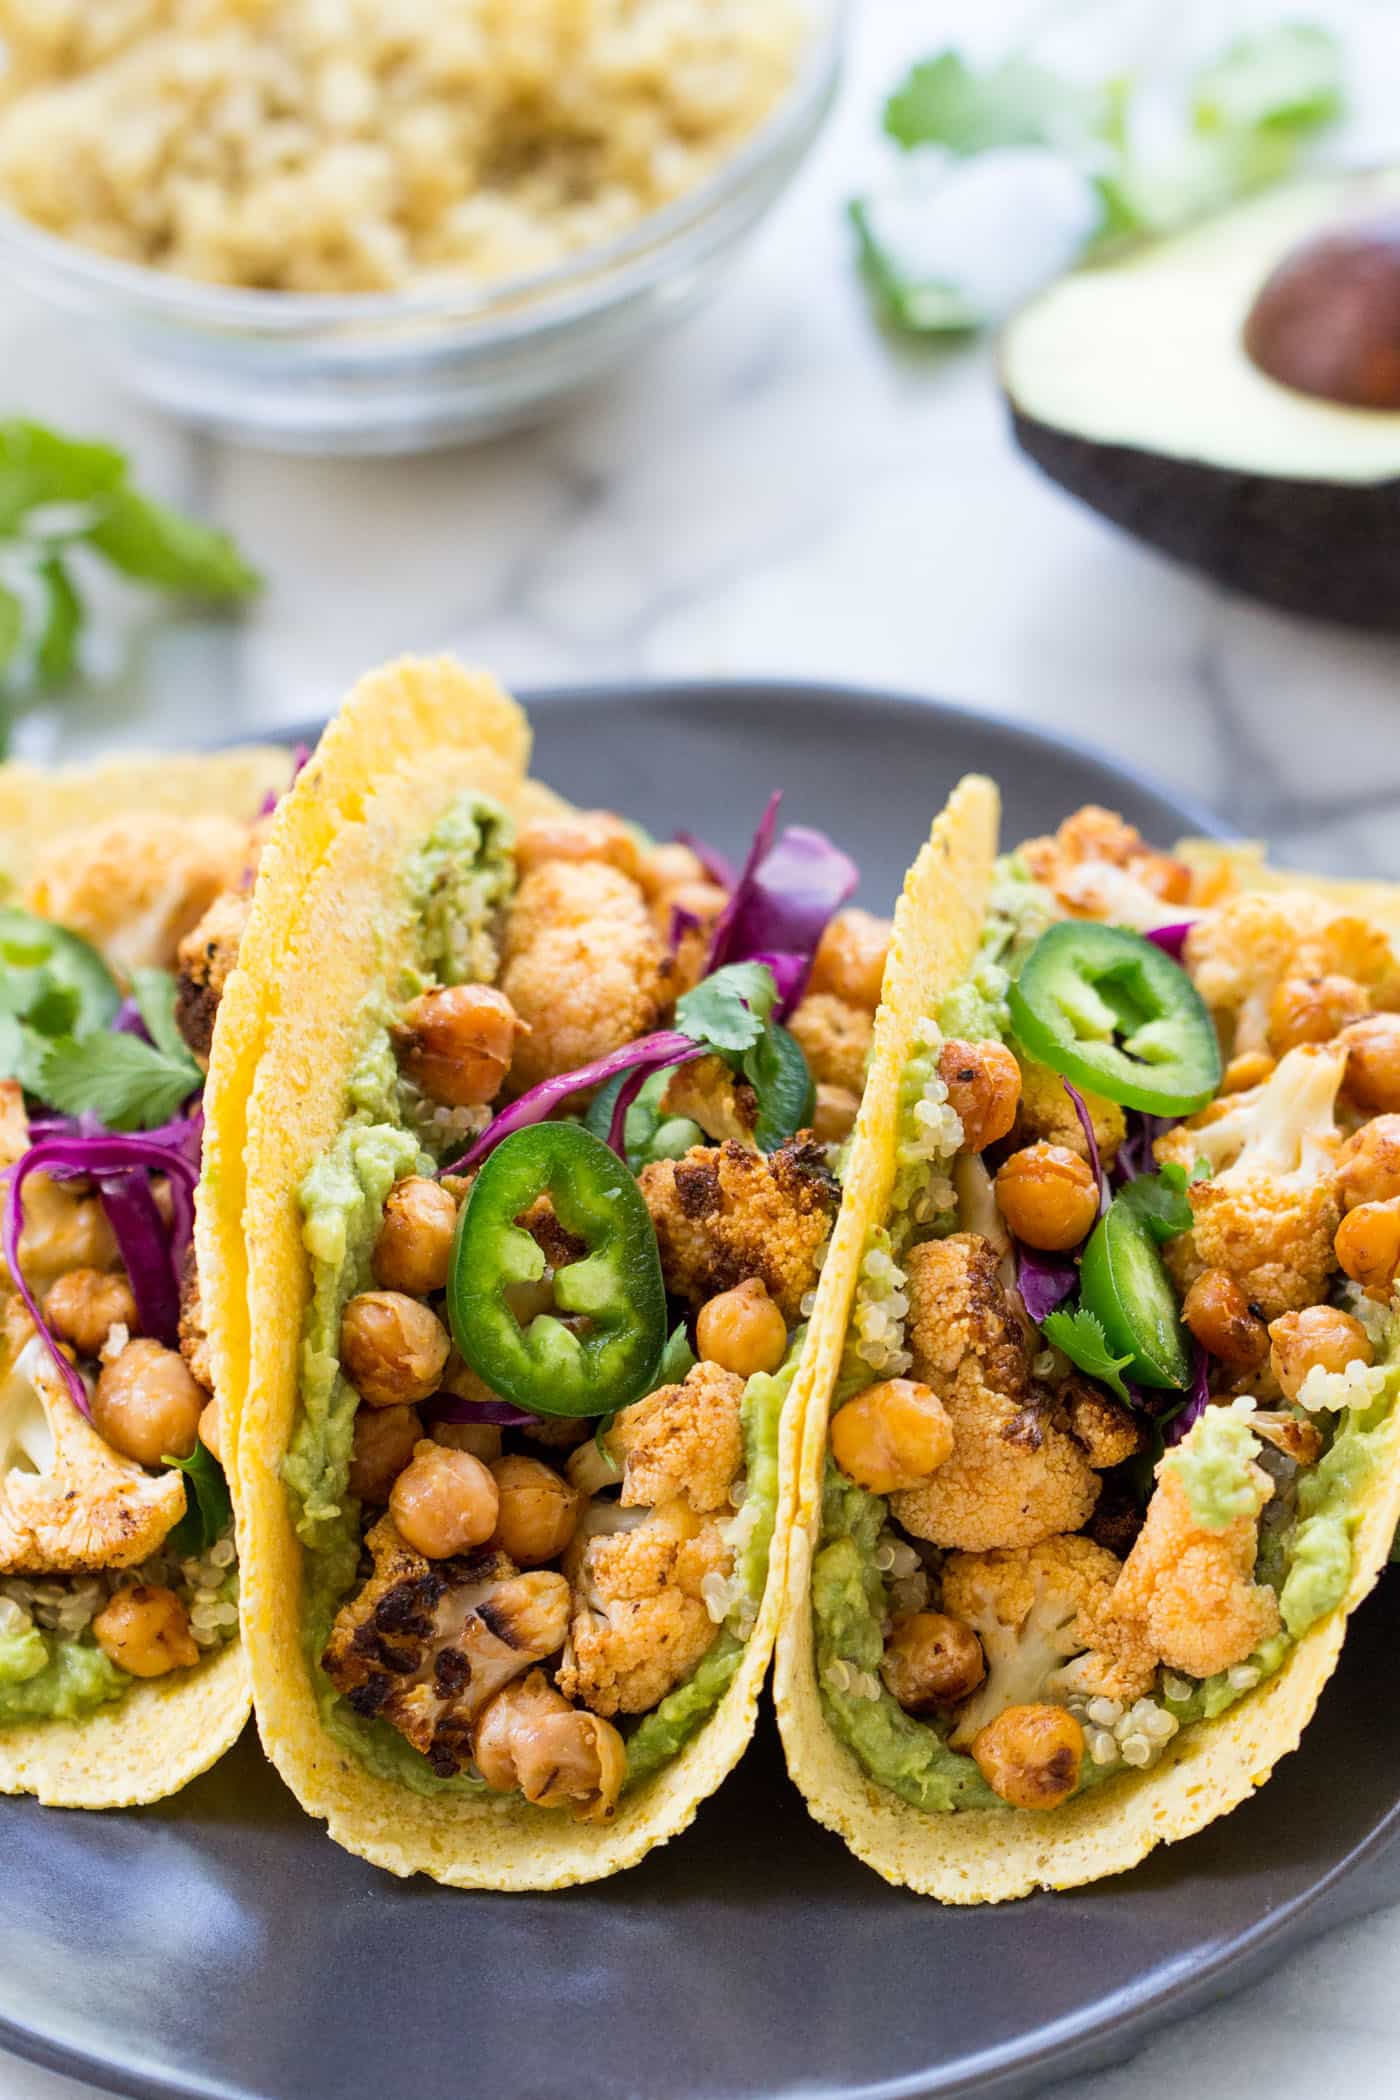 A super HEALTHY vegan taco recipe >> Buffalo Cauliflower + Quinoa Tacos with guac, chickpeas and shredded cabbage on top!